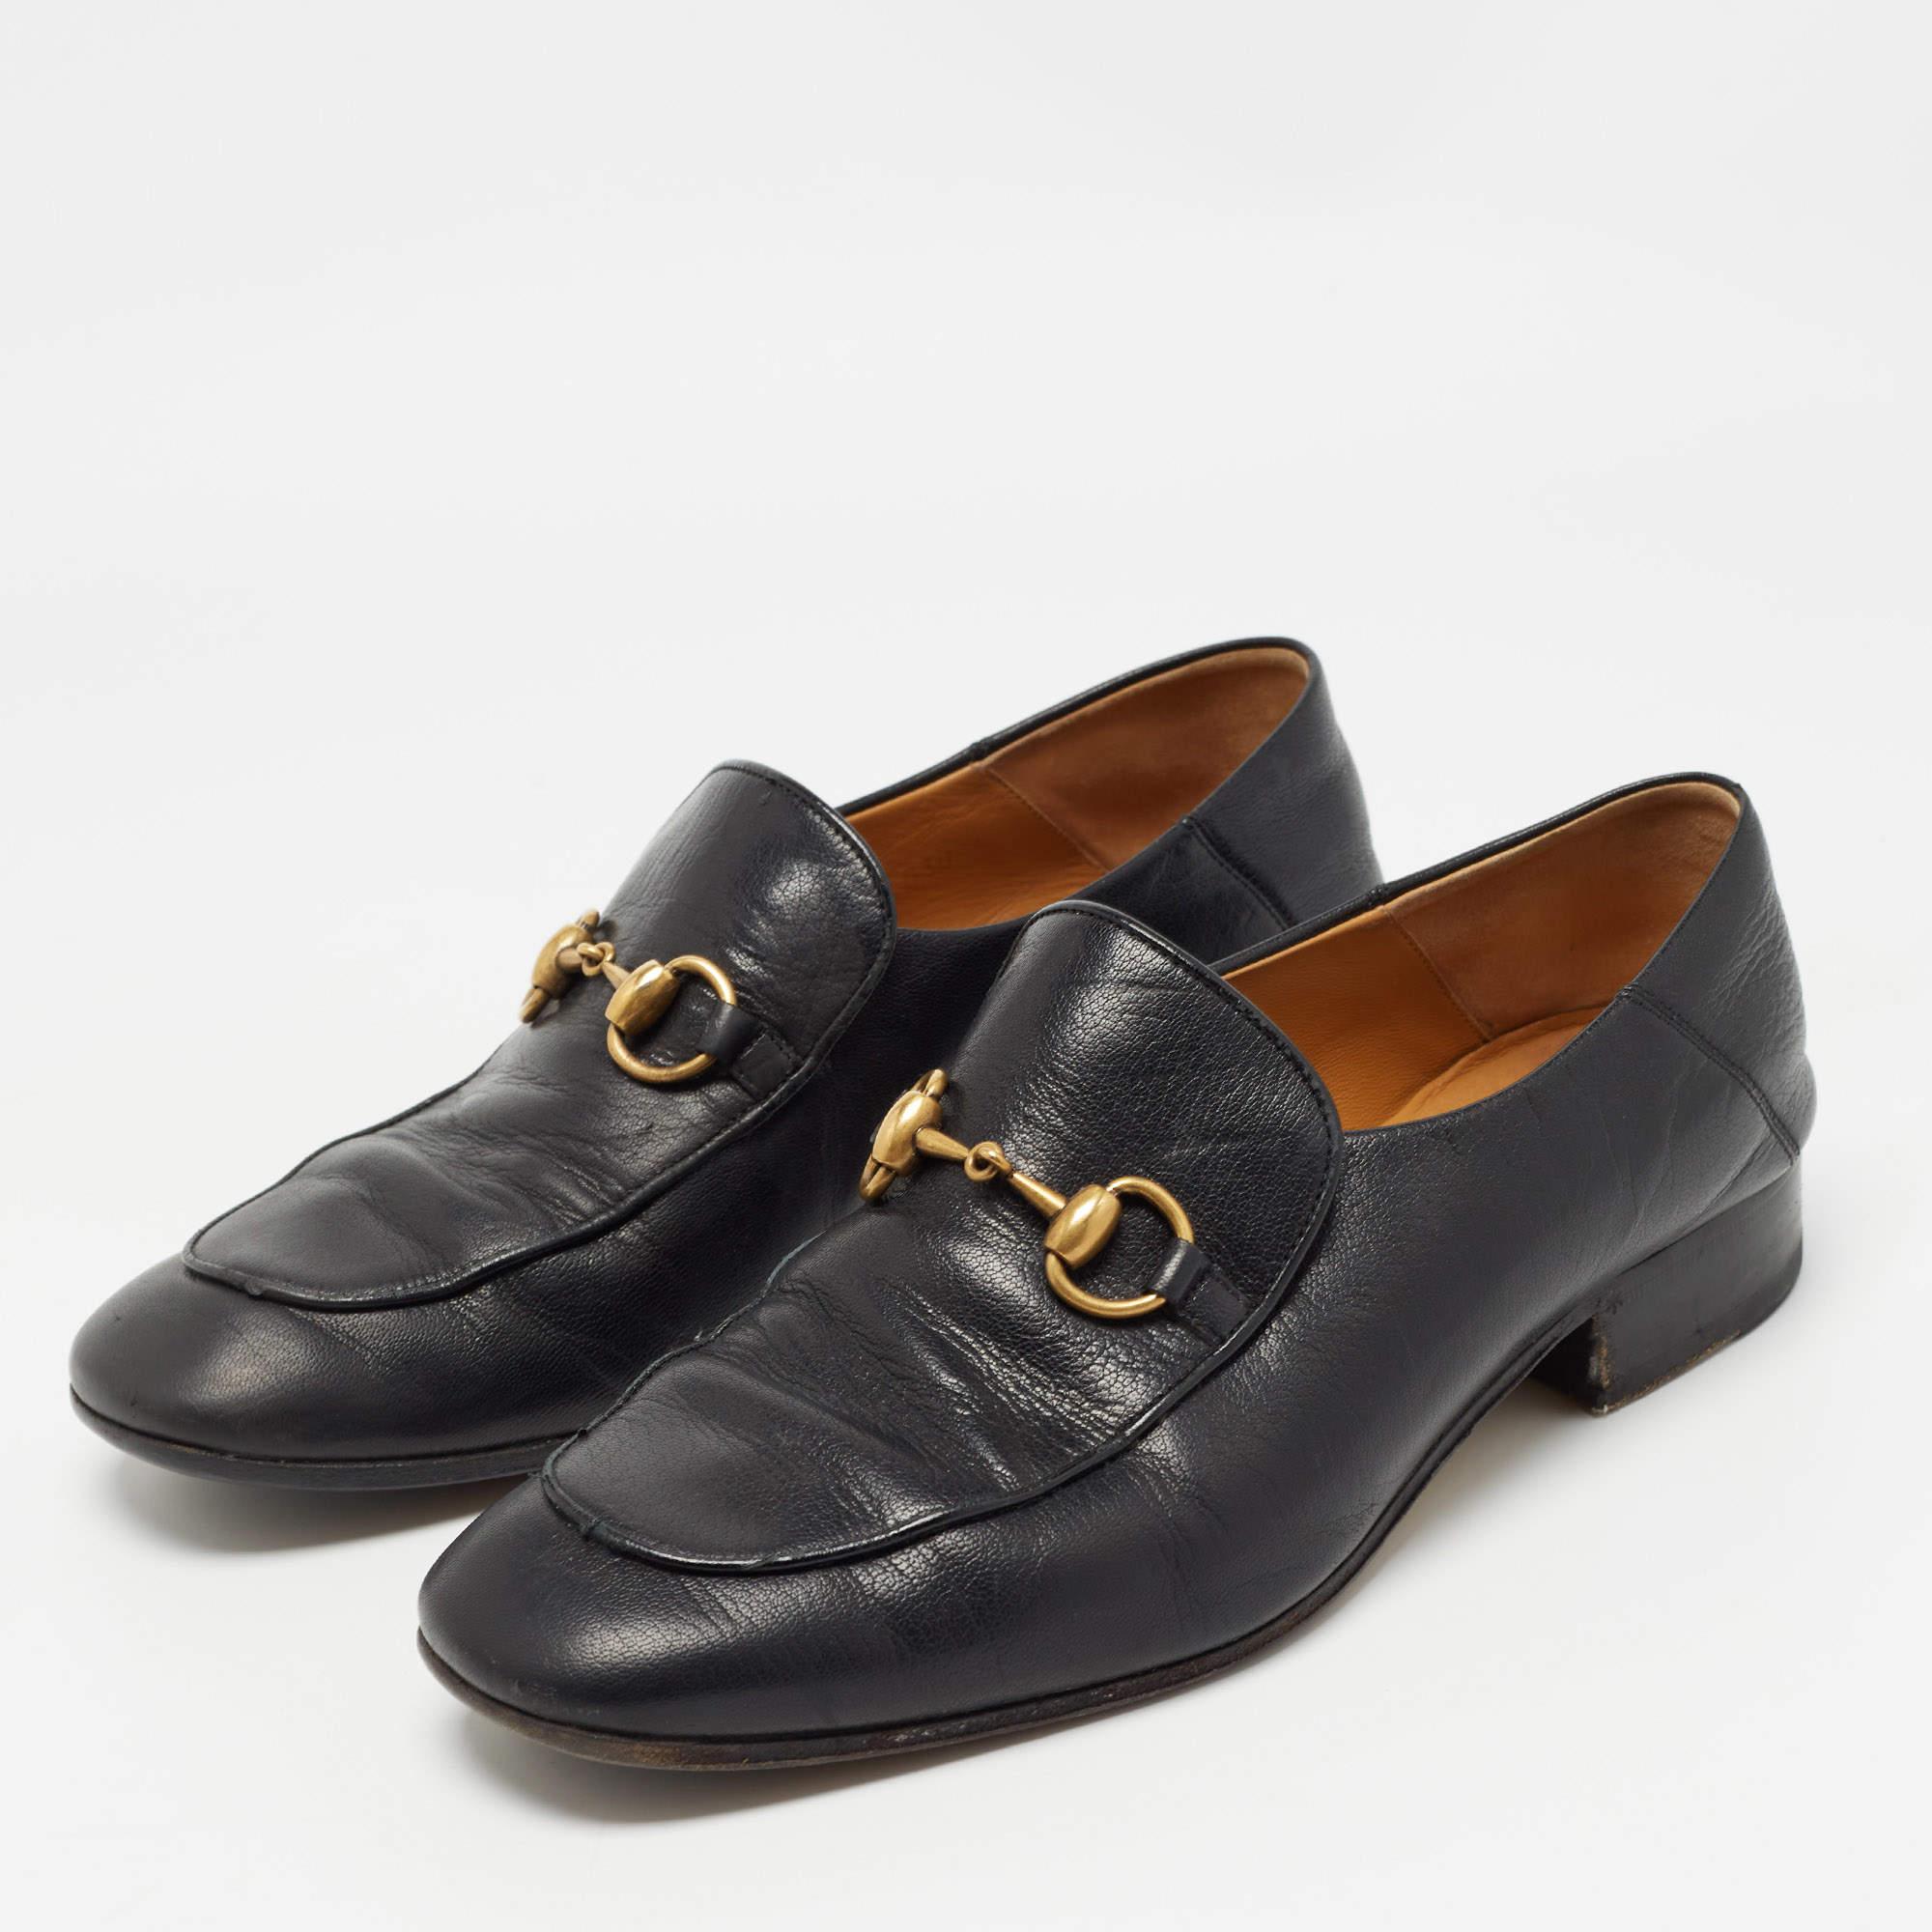 Gucci Black Leather Horsebit 1953 Loafers Size 40.5 5